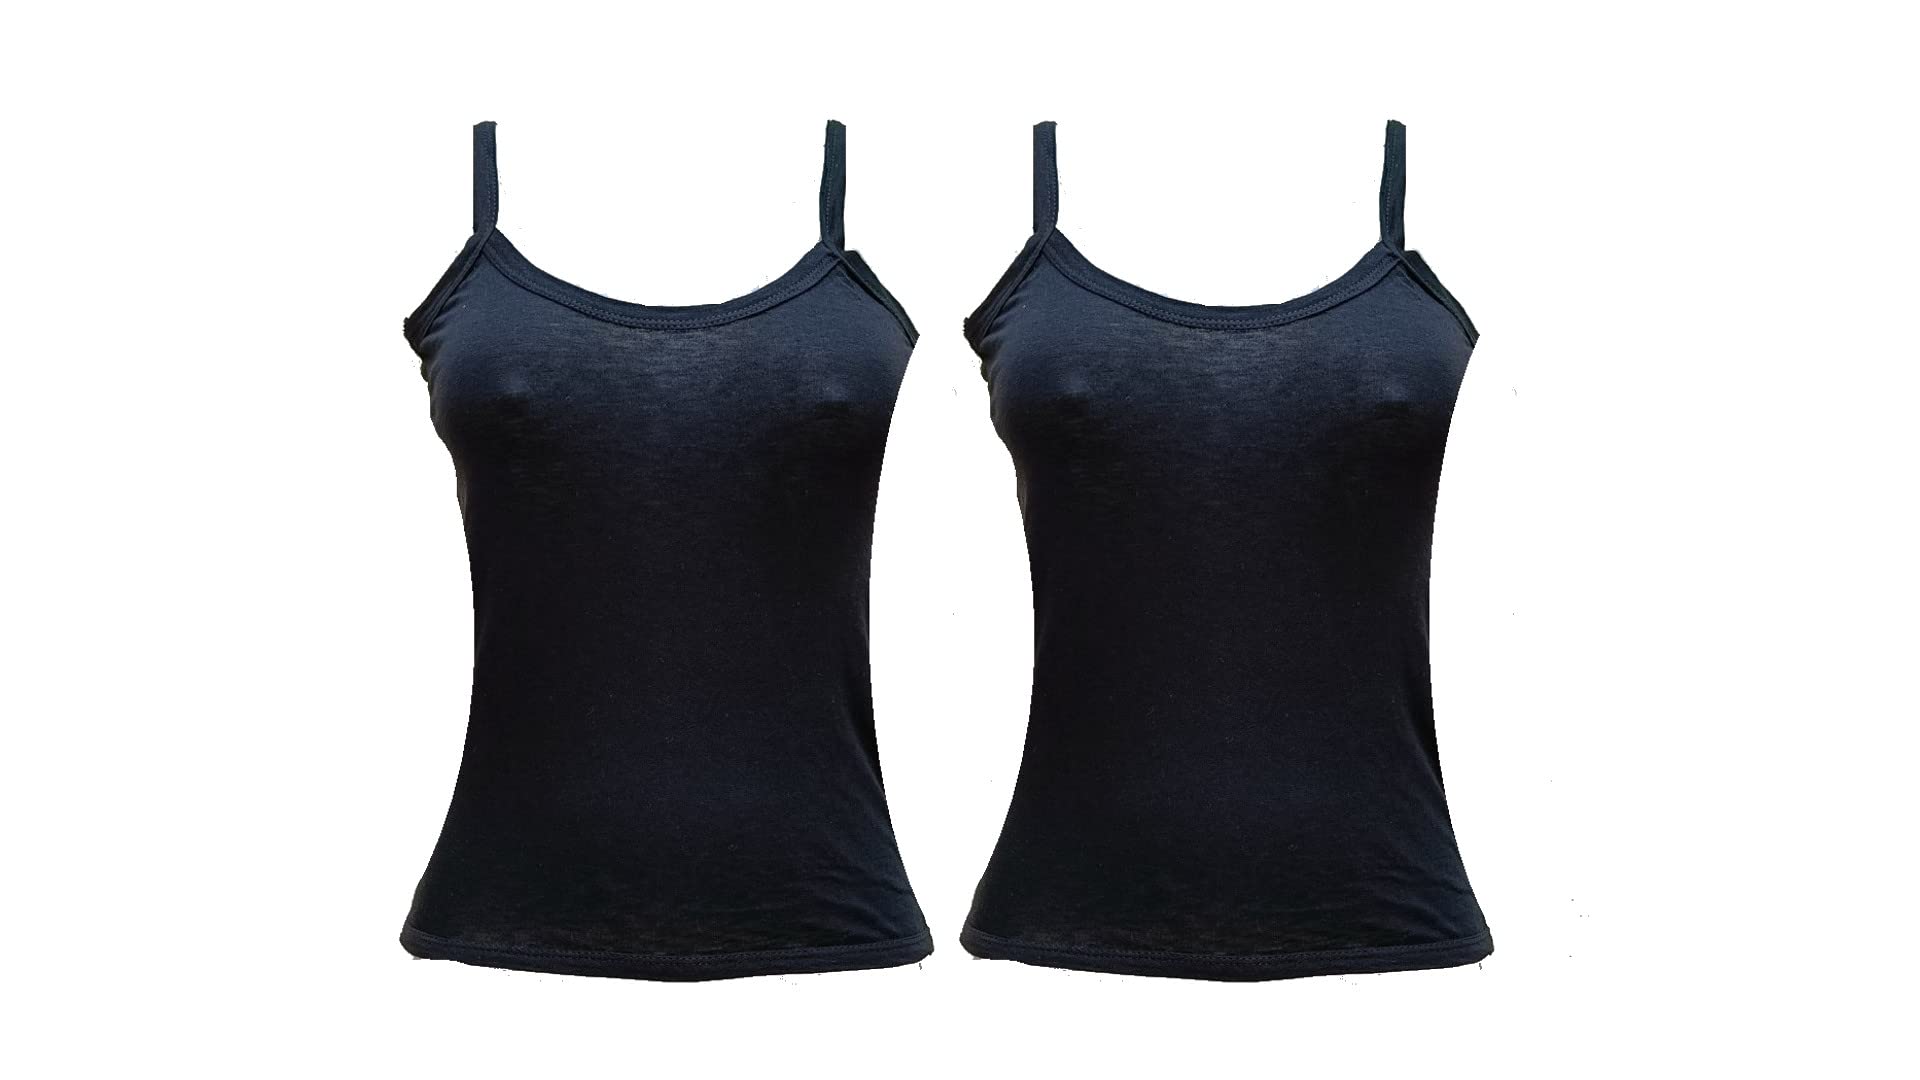 FooFaa Pack of 2 - Cotton Spandex Bra Blouse Top Camisole Tank for